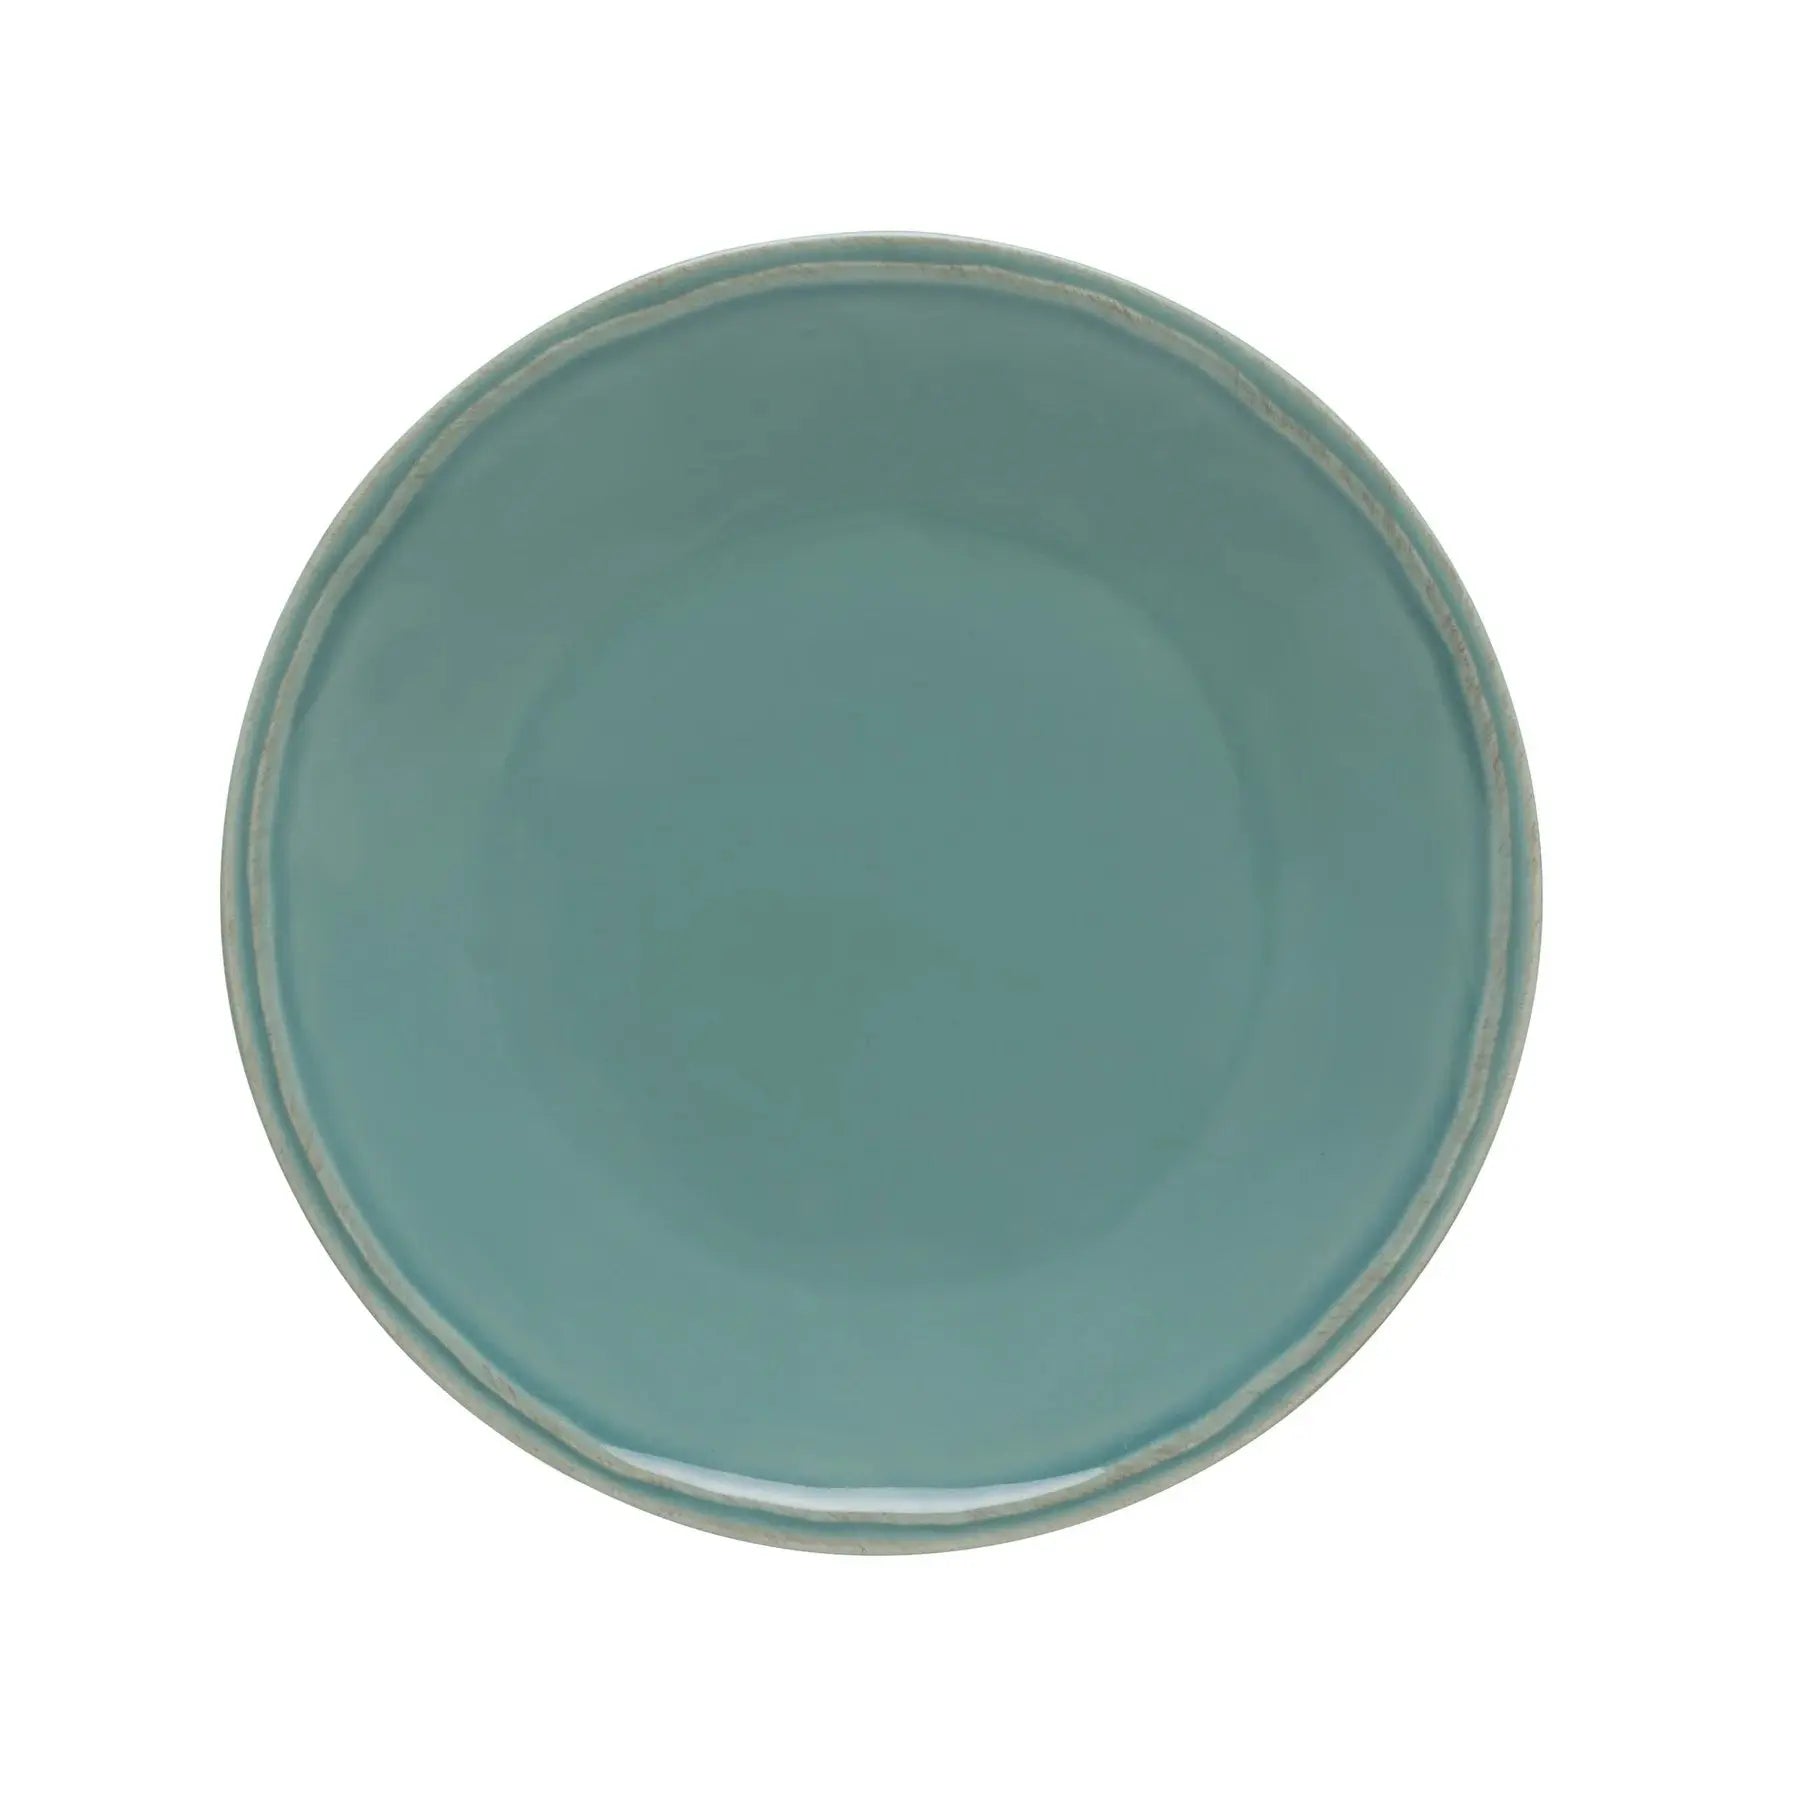 Casafina Fontana Salad Plate in Turquoise